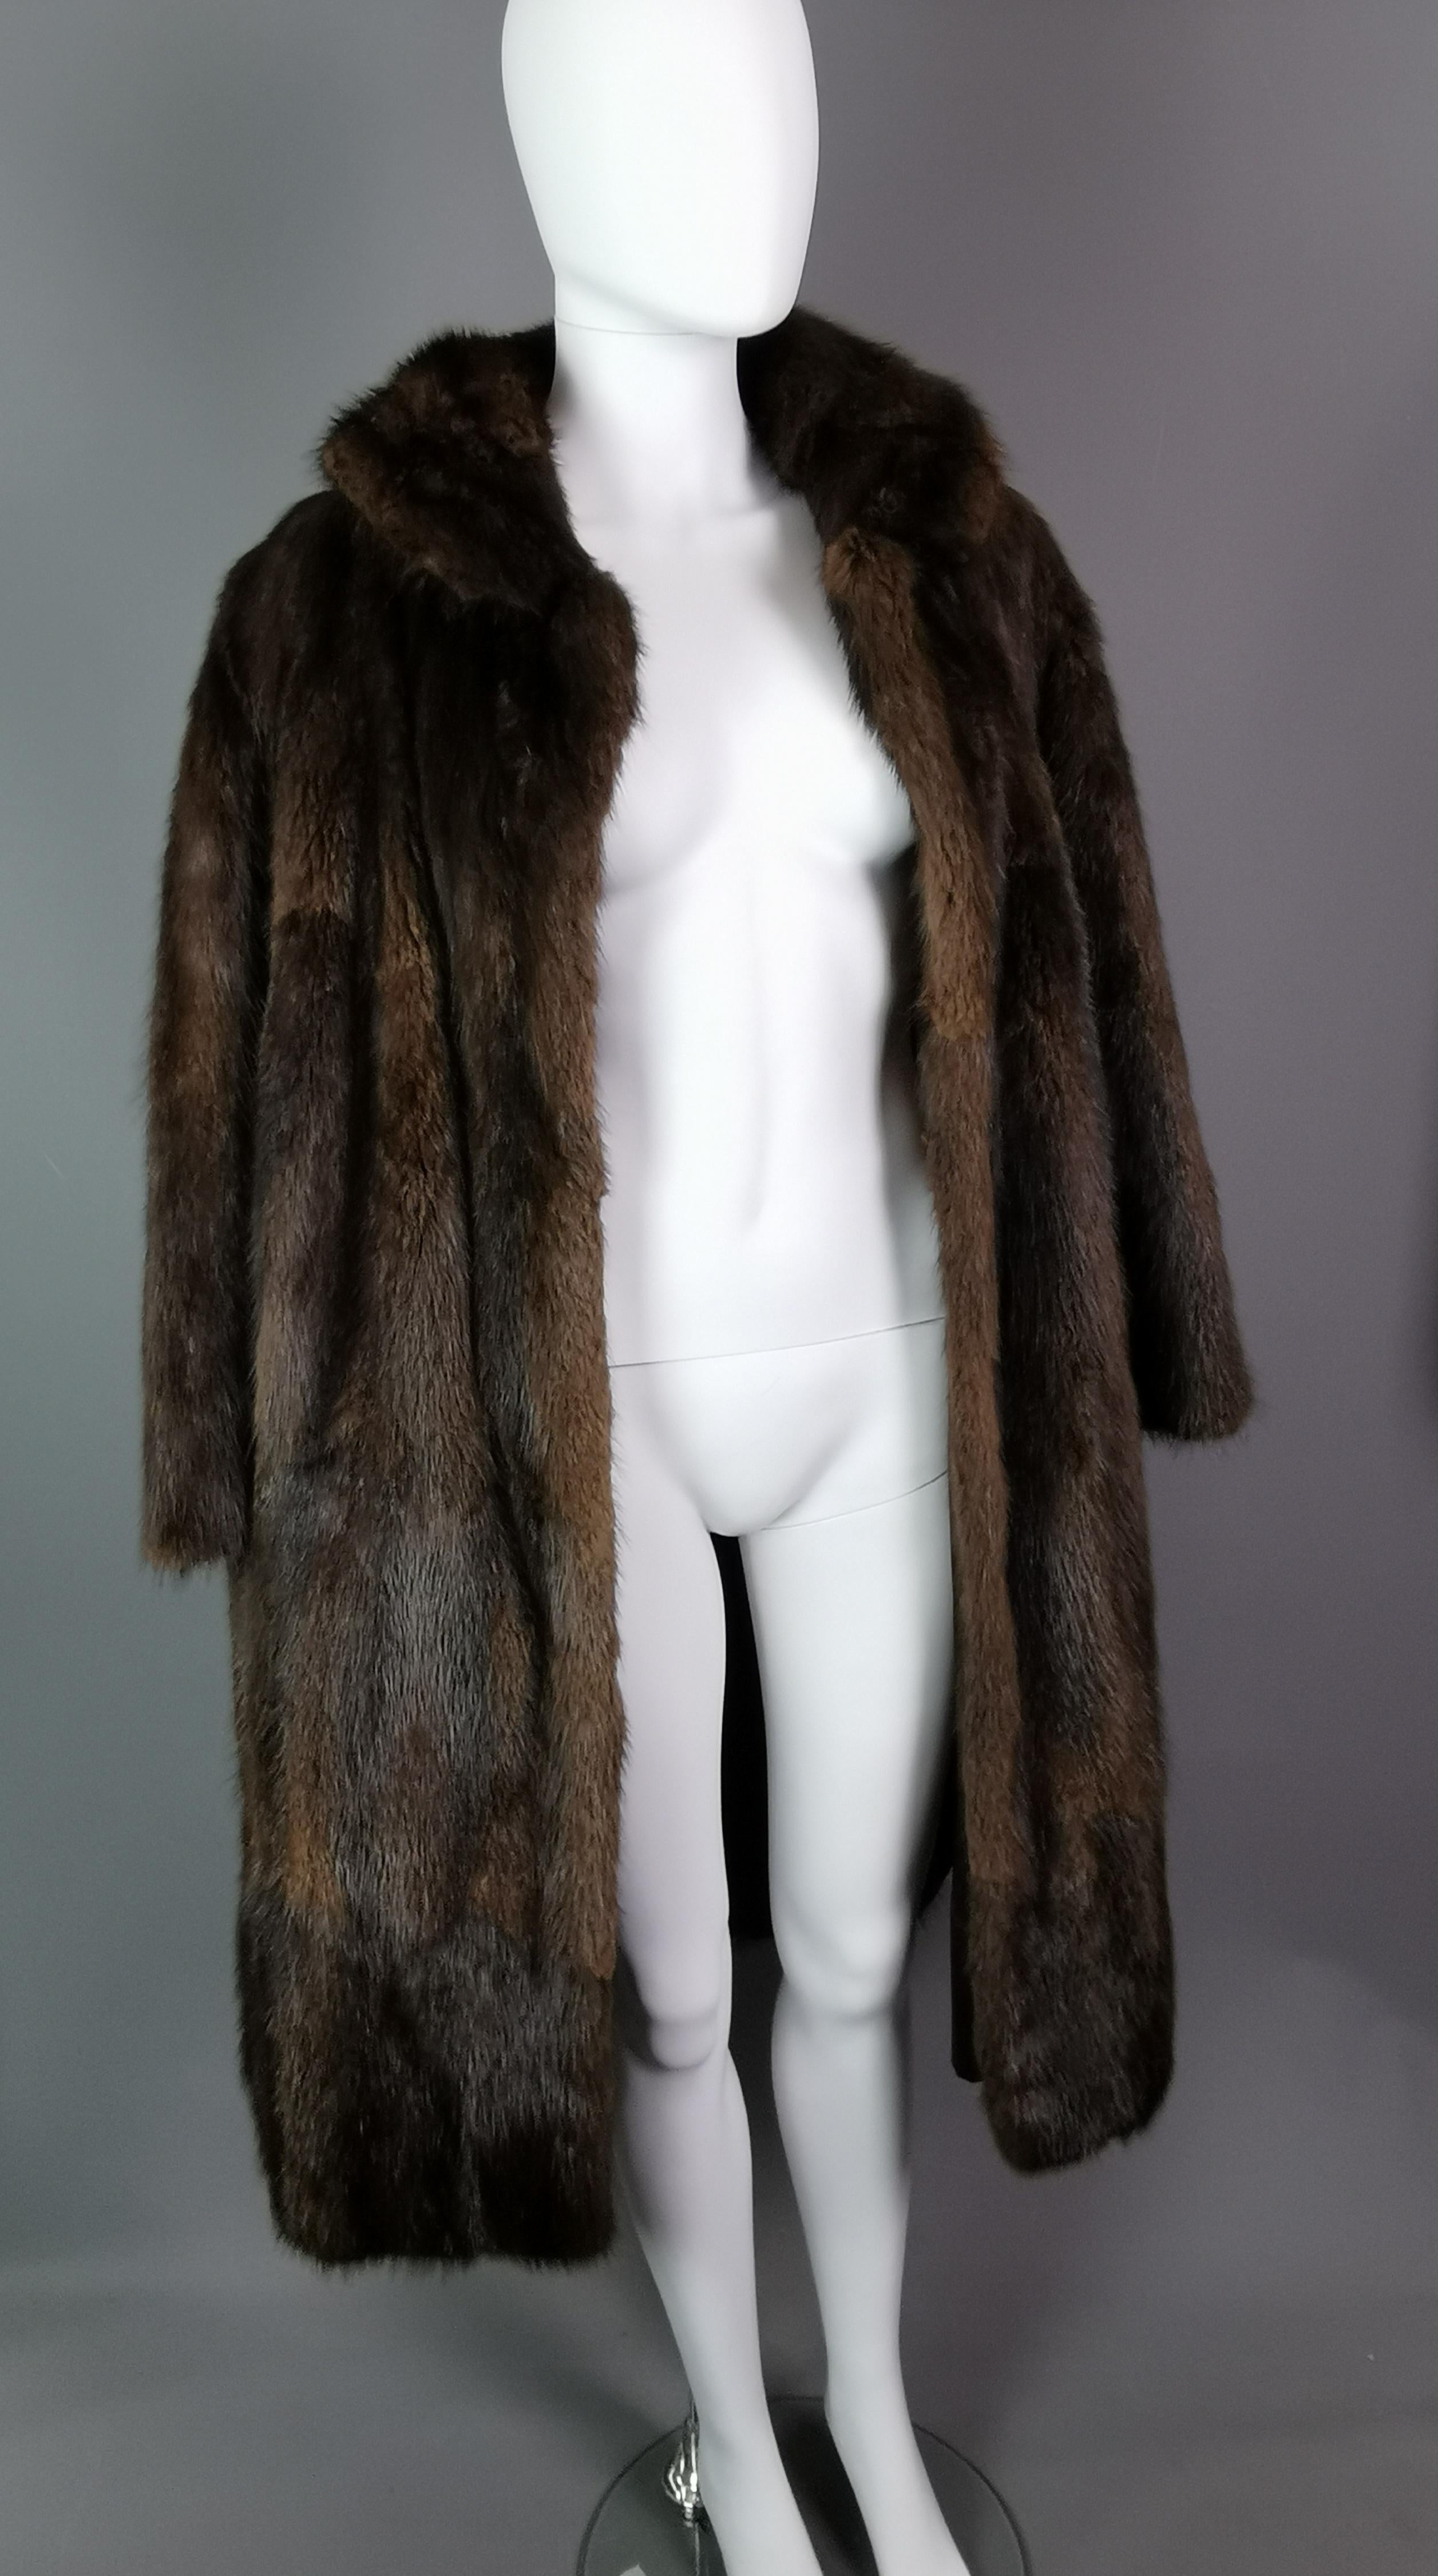 A very fine, high quality vintage mink fur swing coat.

It is made from mahogany brown and black mink fur, superbly soft and lined in a chocolate brown satin.

It has a nice wide collar.

It has no fasteners and is labelled Kendal Milne, Kendal